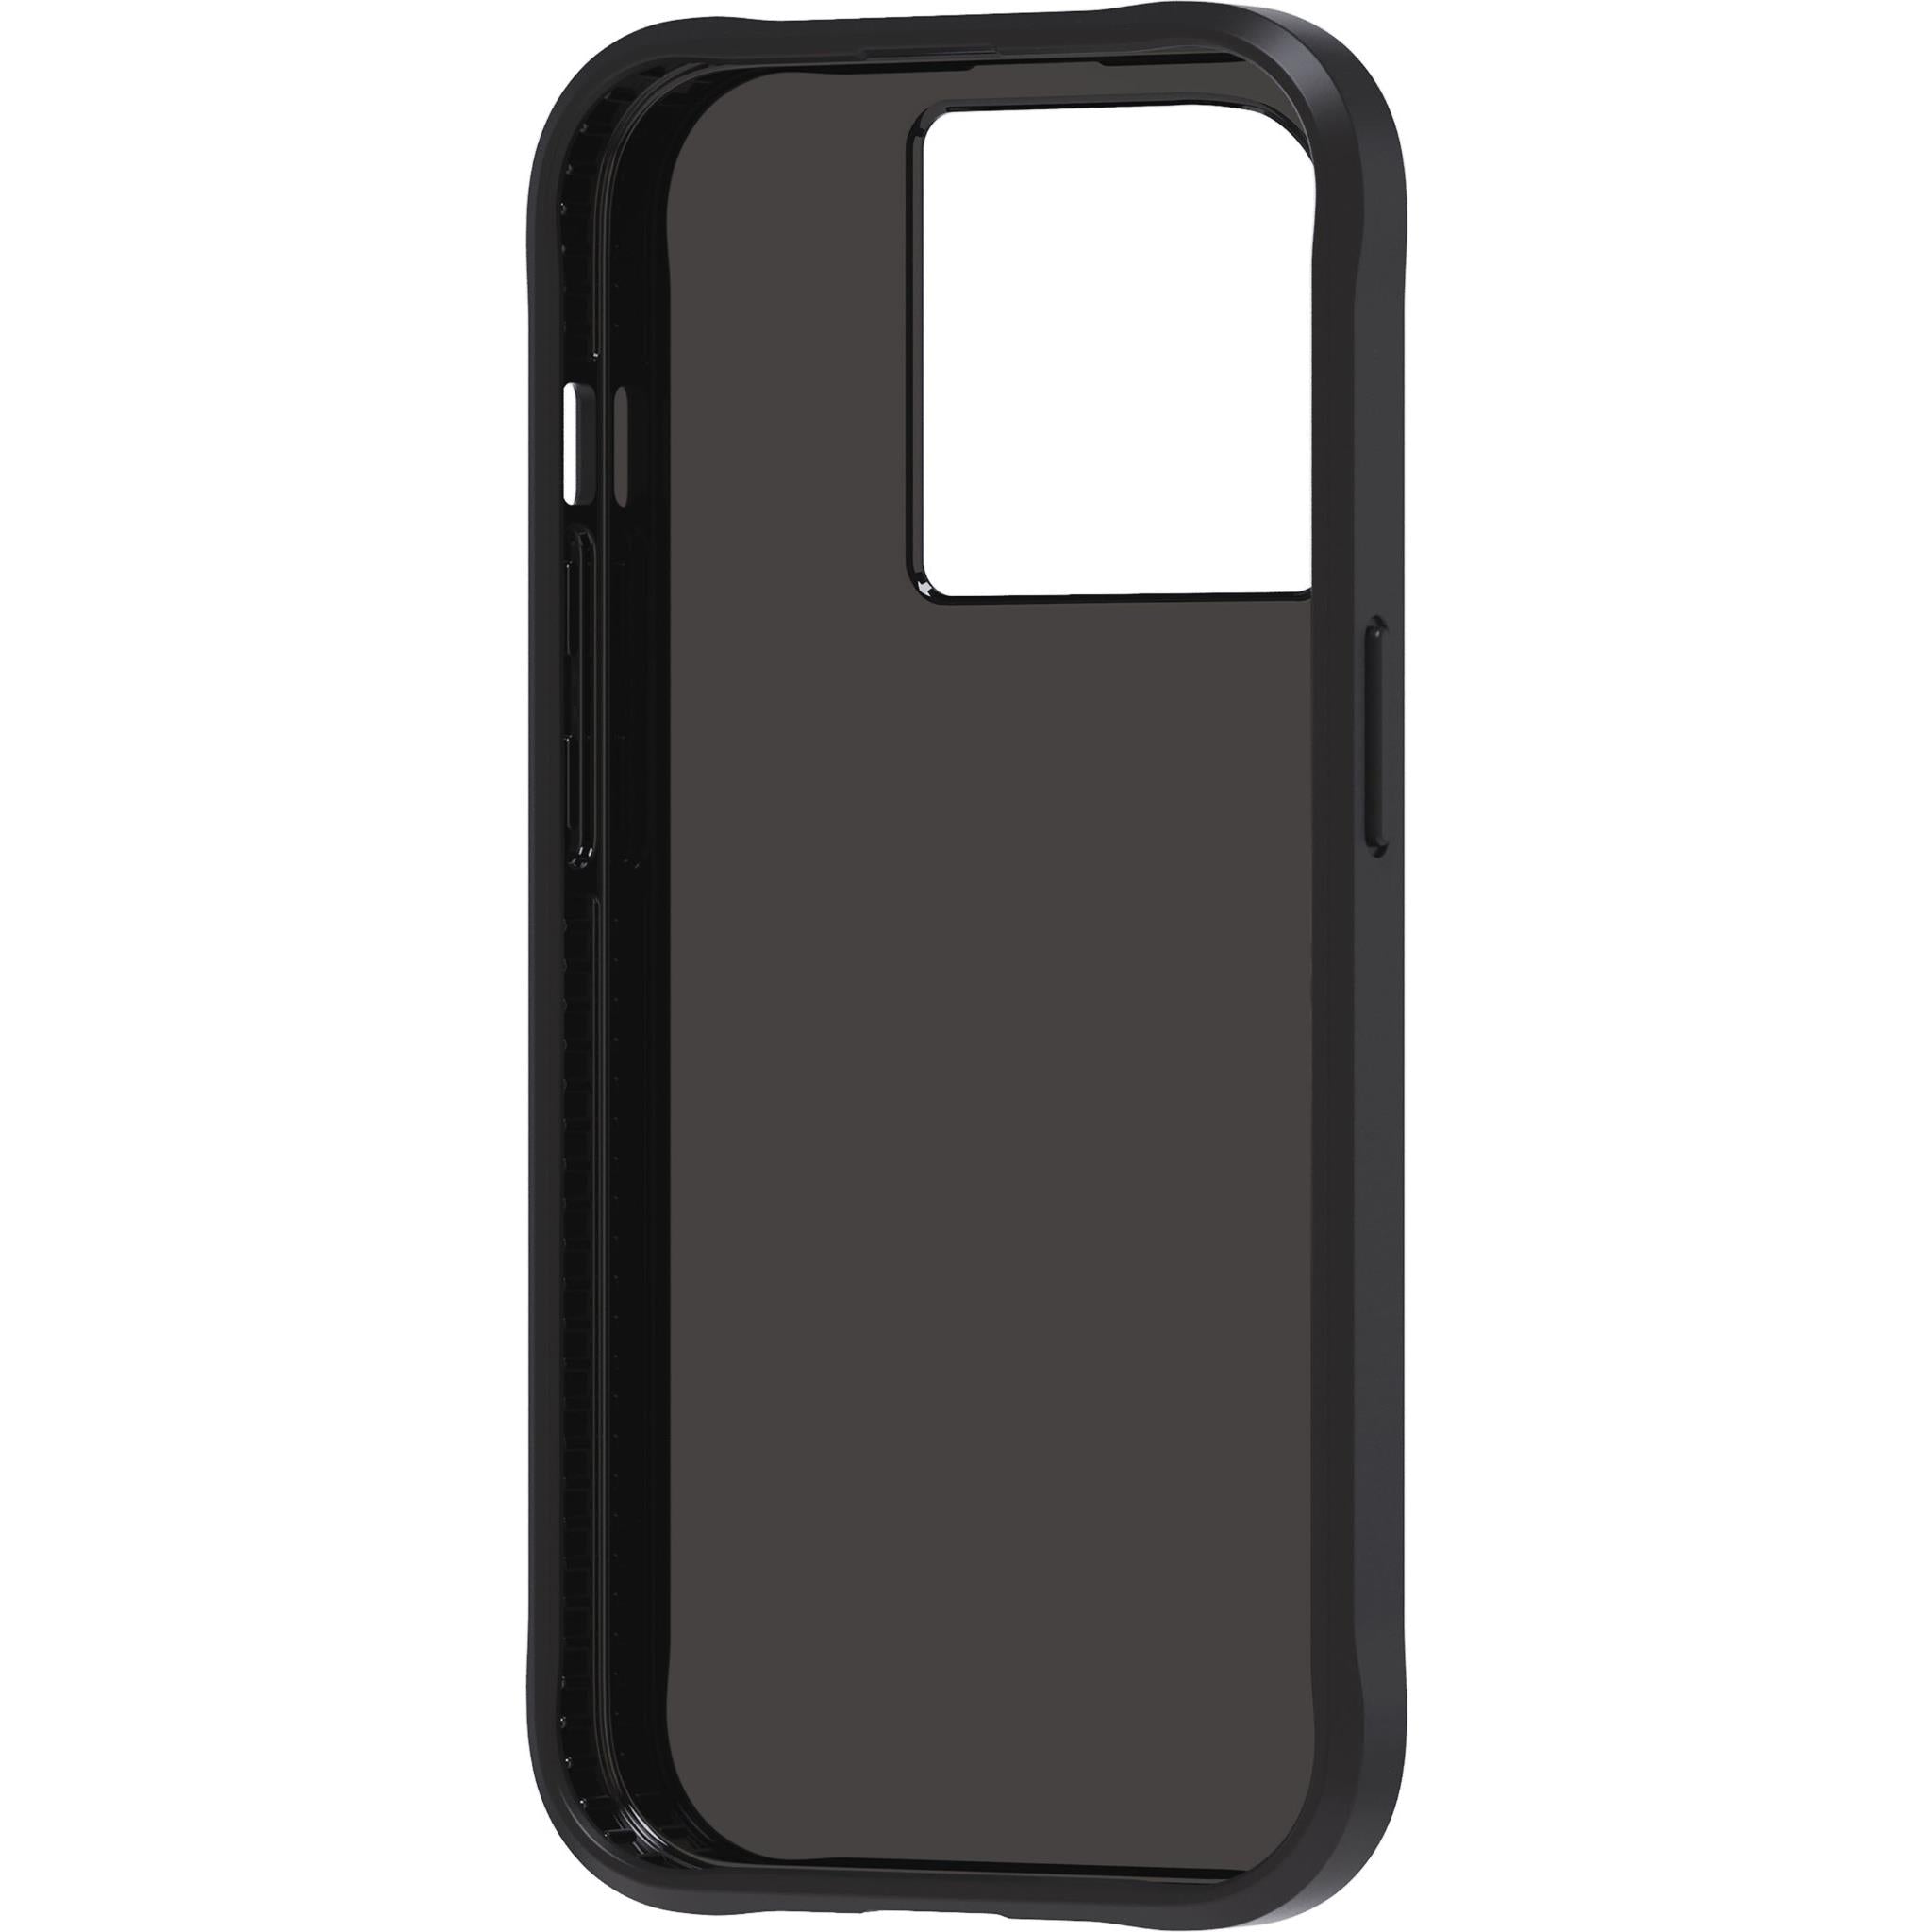 Pelican Protector Case for Apple iPhone 8 / SE - Black – Pelican Phone Cases